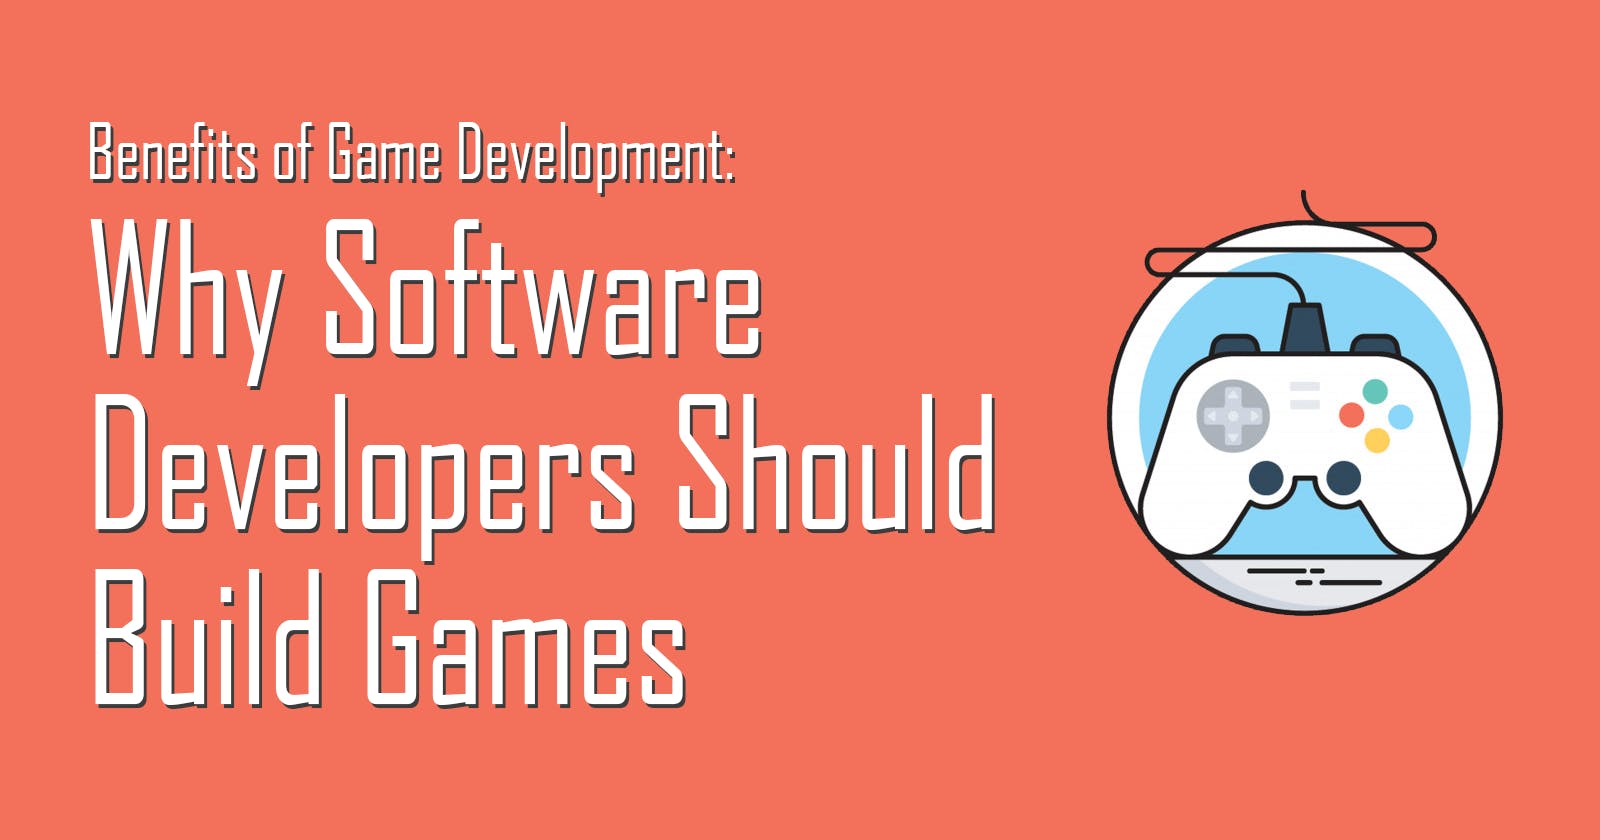 Why Software Developers Should Build Games